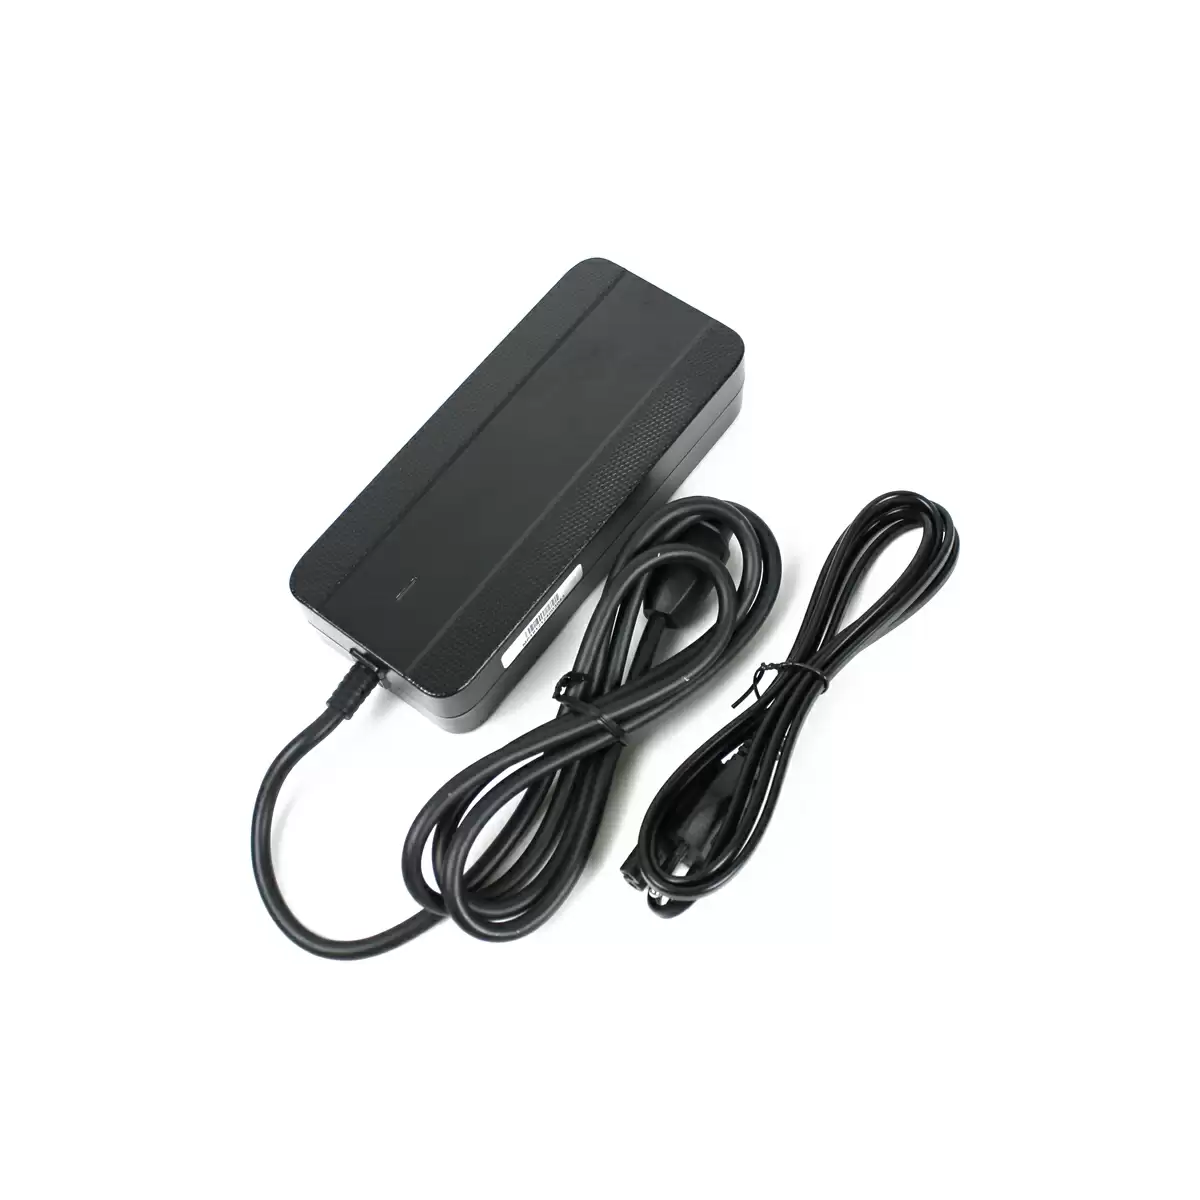 Ebike battery charger 240v for LC 2018 - image